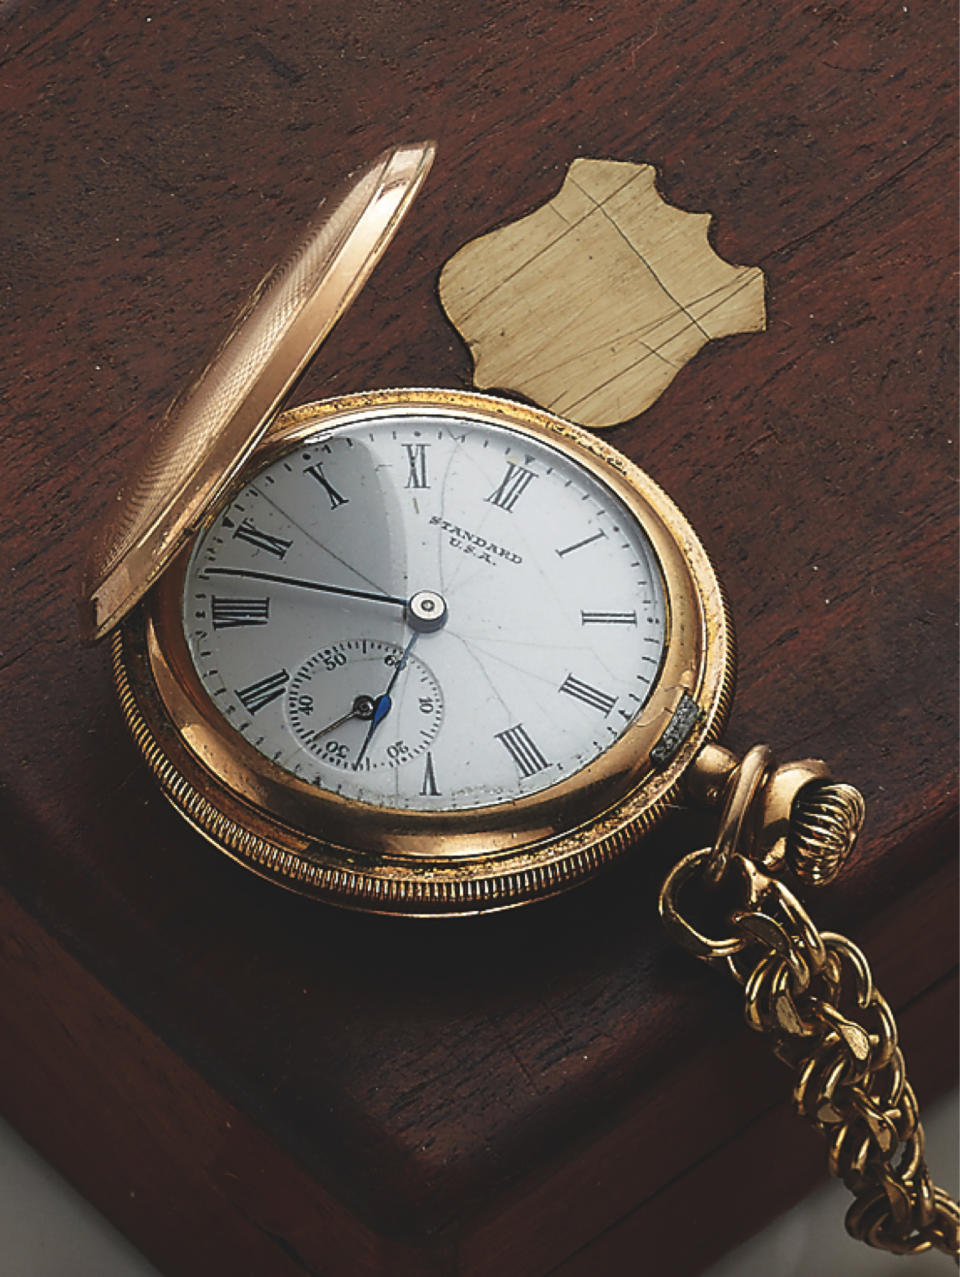 most expensive watches in the world, James Dean’s watch, james dean, James Dean’s Standard USA Pocketwatch, Standard USA Pocketwatch, $41,587.91 watch, auction, antiquorum